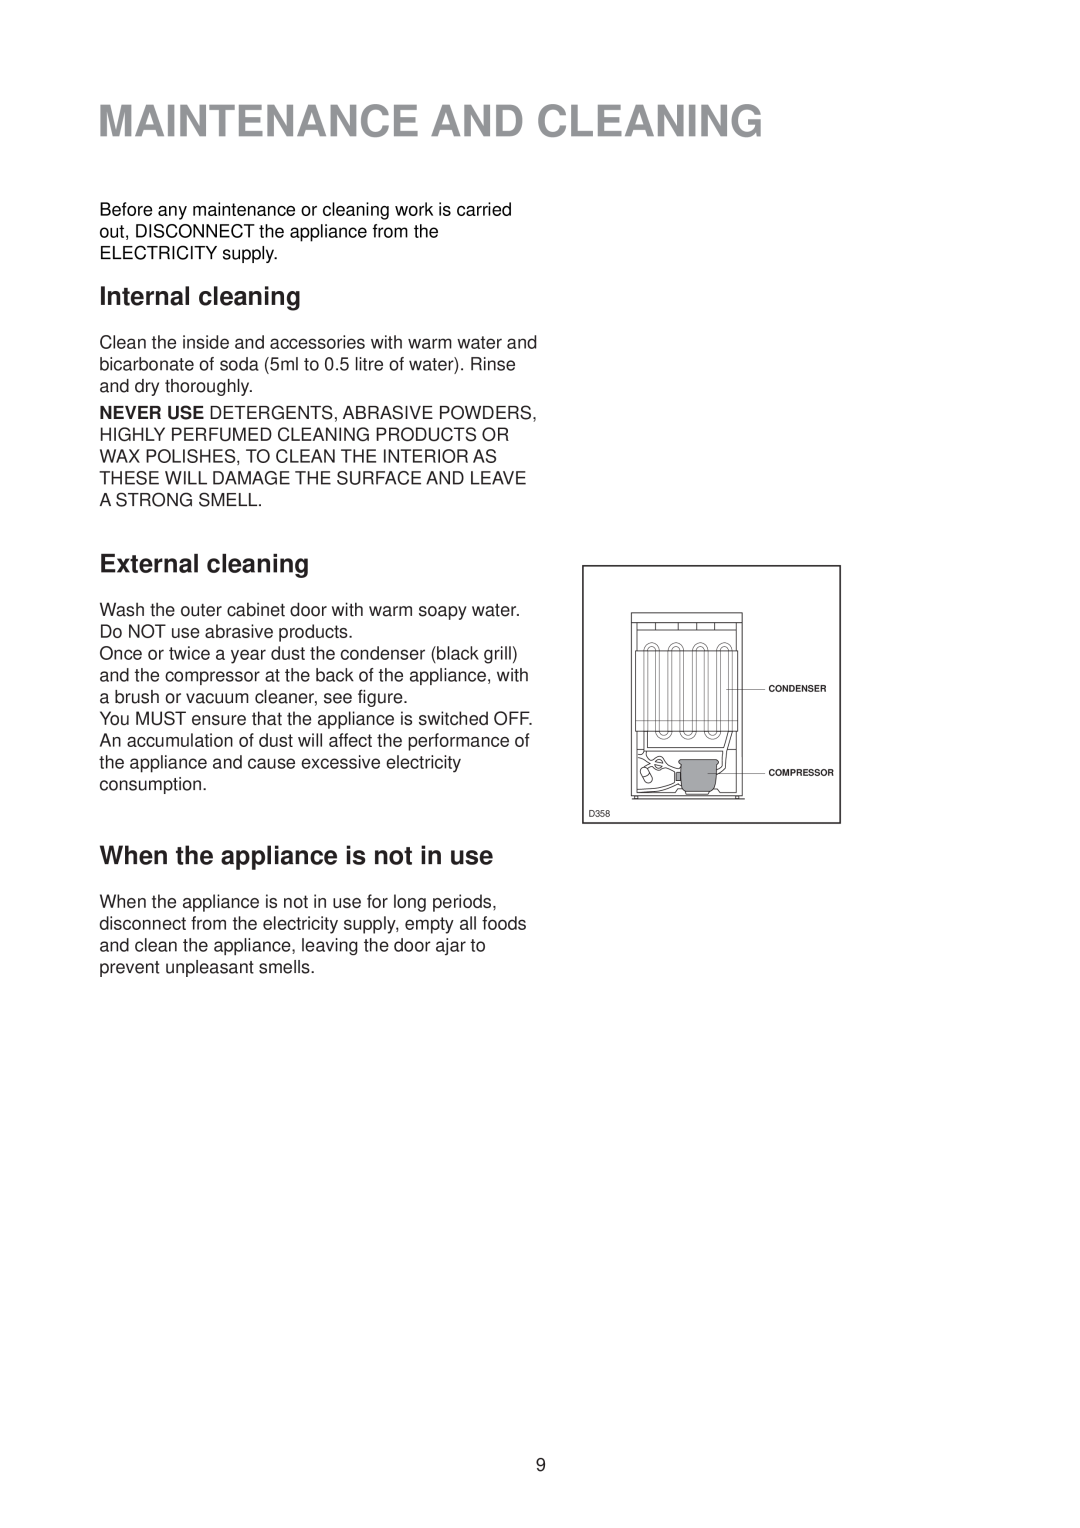 Zanussi ZV 41 R manual Maintenance And Cleaning, Internal cleaning, External cleaning, When the appliance is not in use 